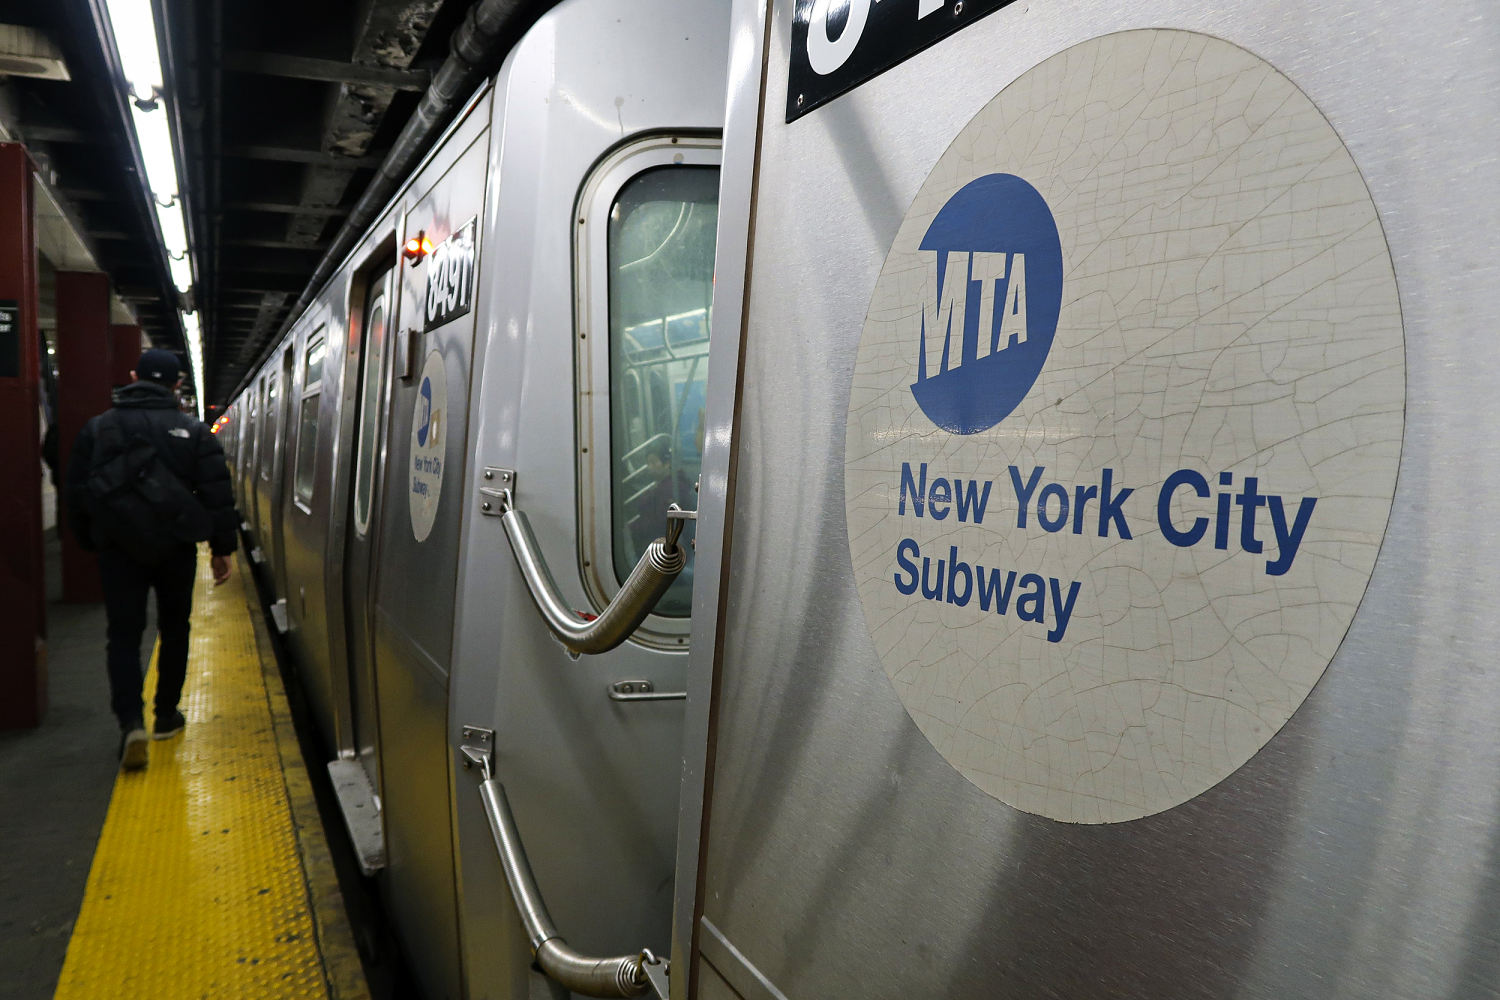 Woman’s feet amputated after boyfriend allegedly shoves her in front of NYC train